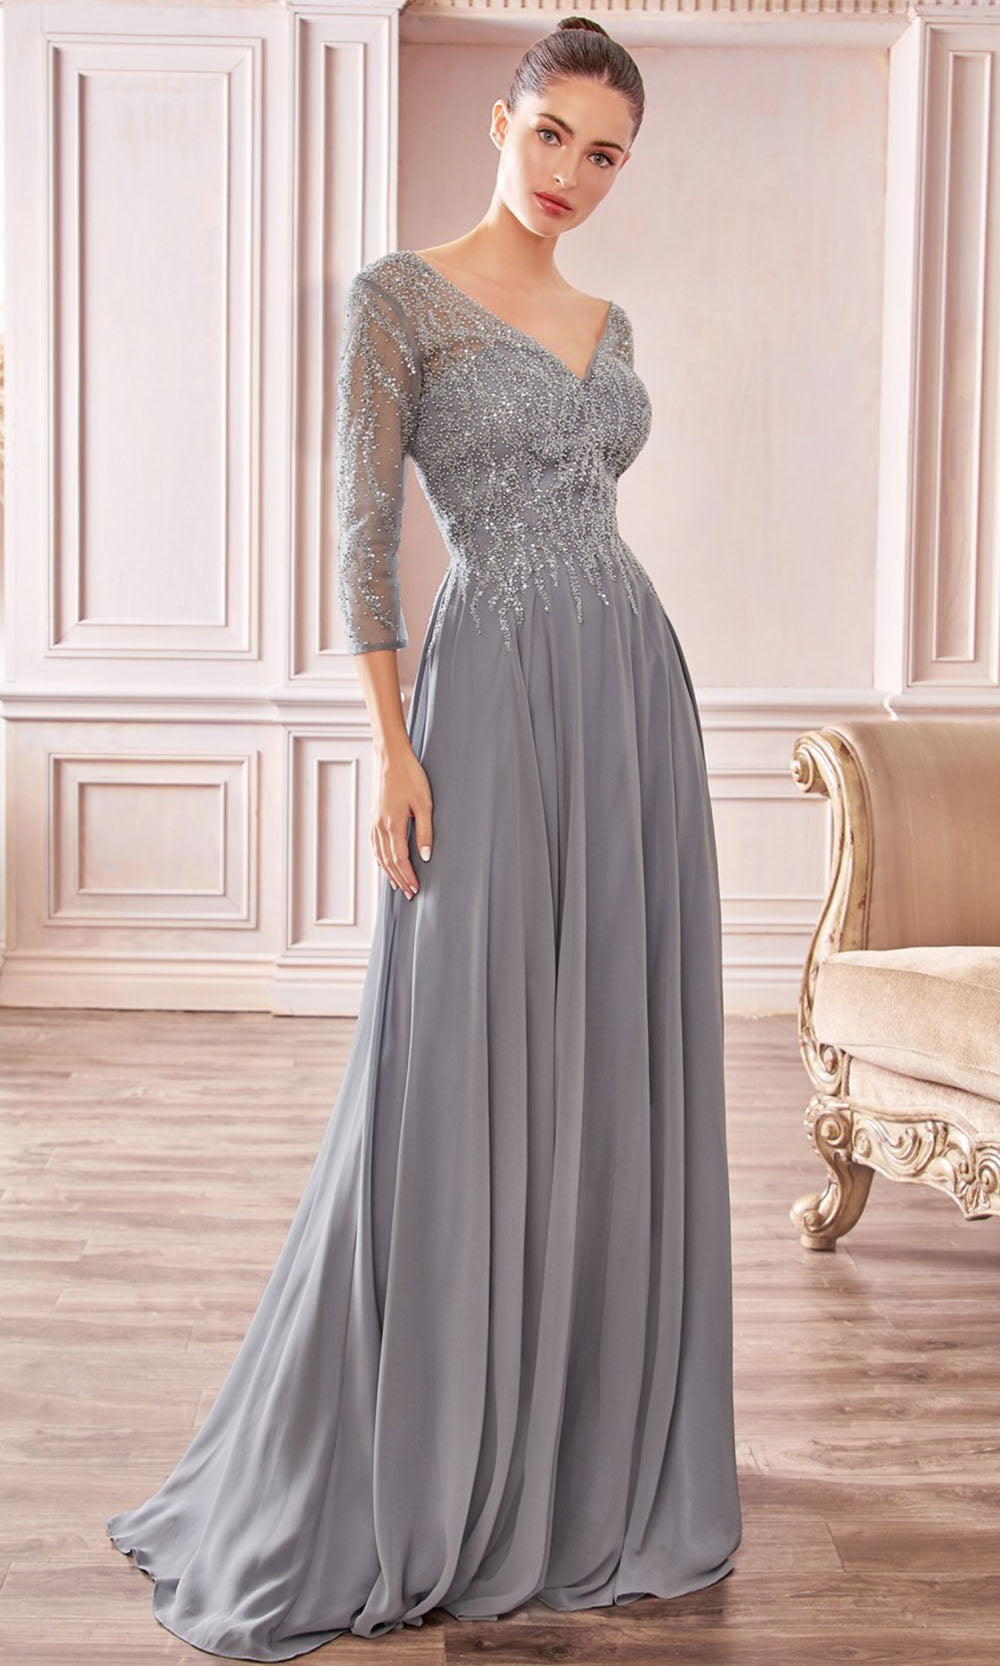 Cinderella Divine - CD0171 Sheer Jeweled Chiffon Gown In Silver and Gray